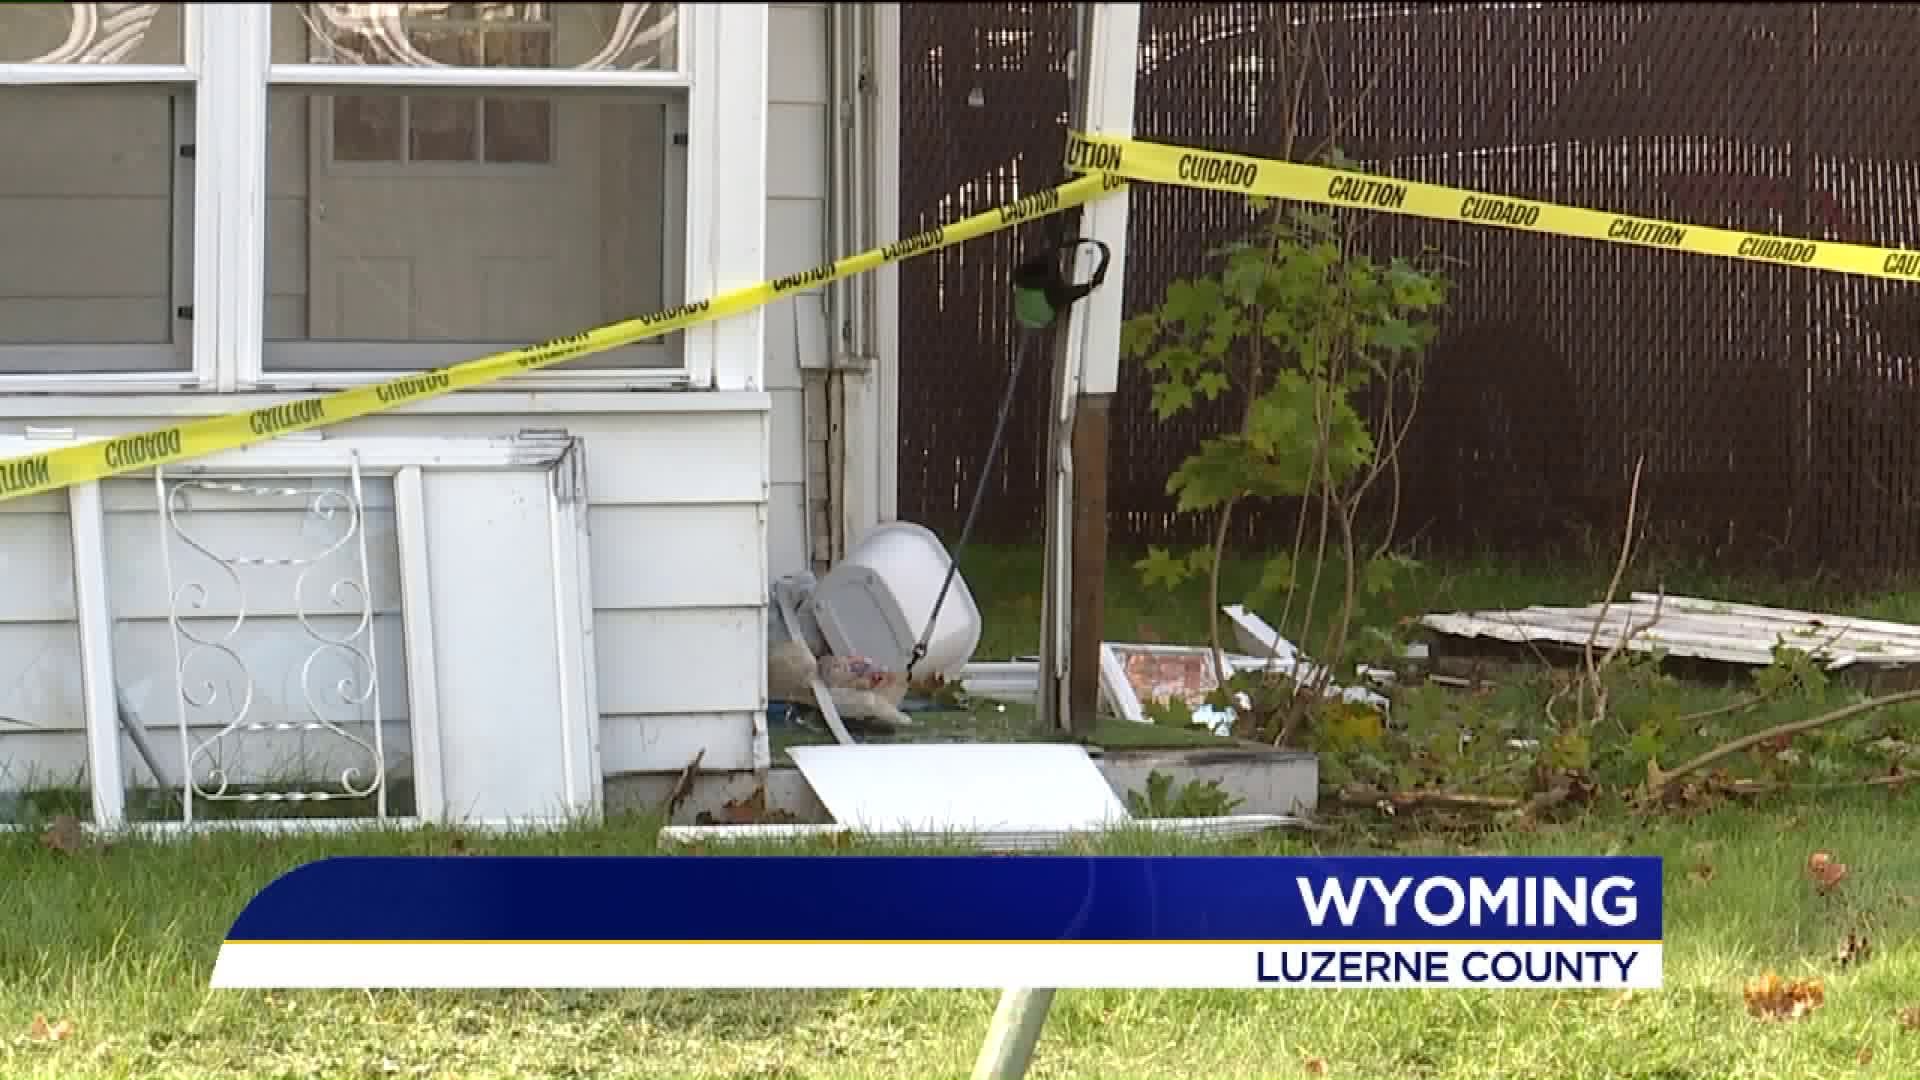 Man Driving in Reverse Crashes into Porch in Luzerne County